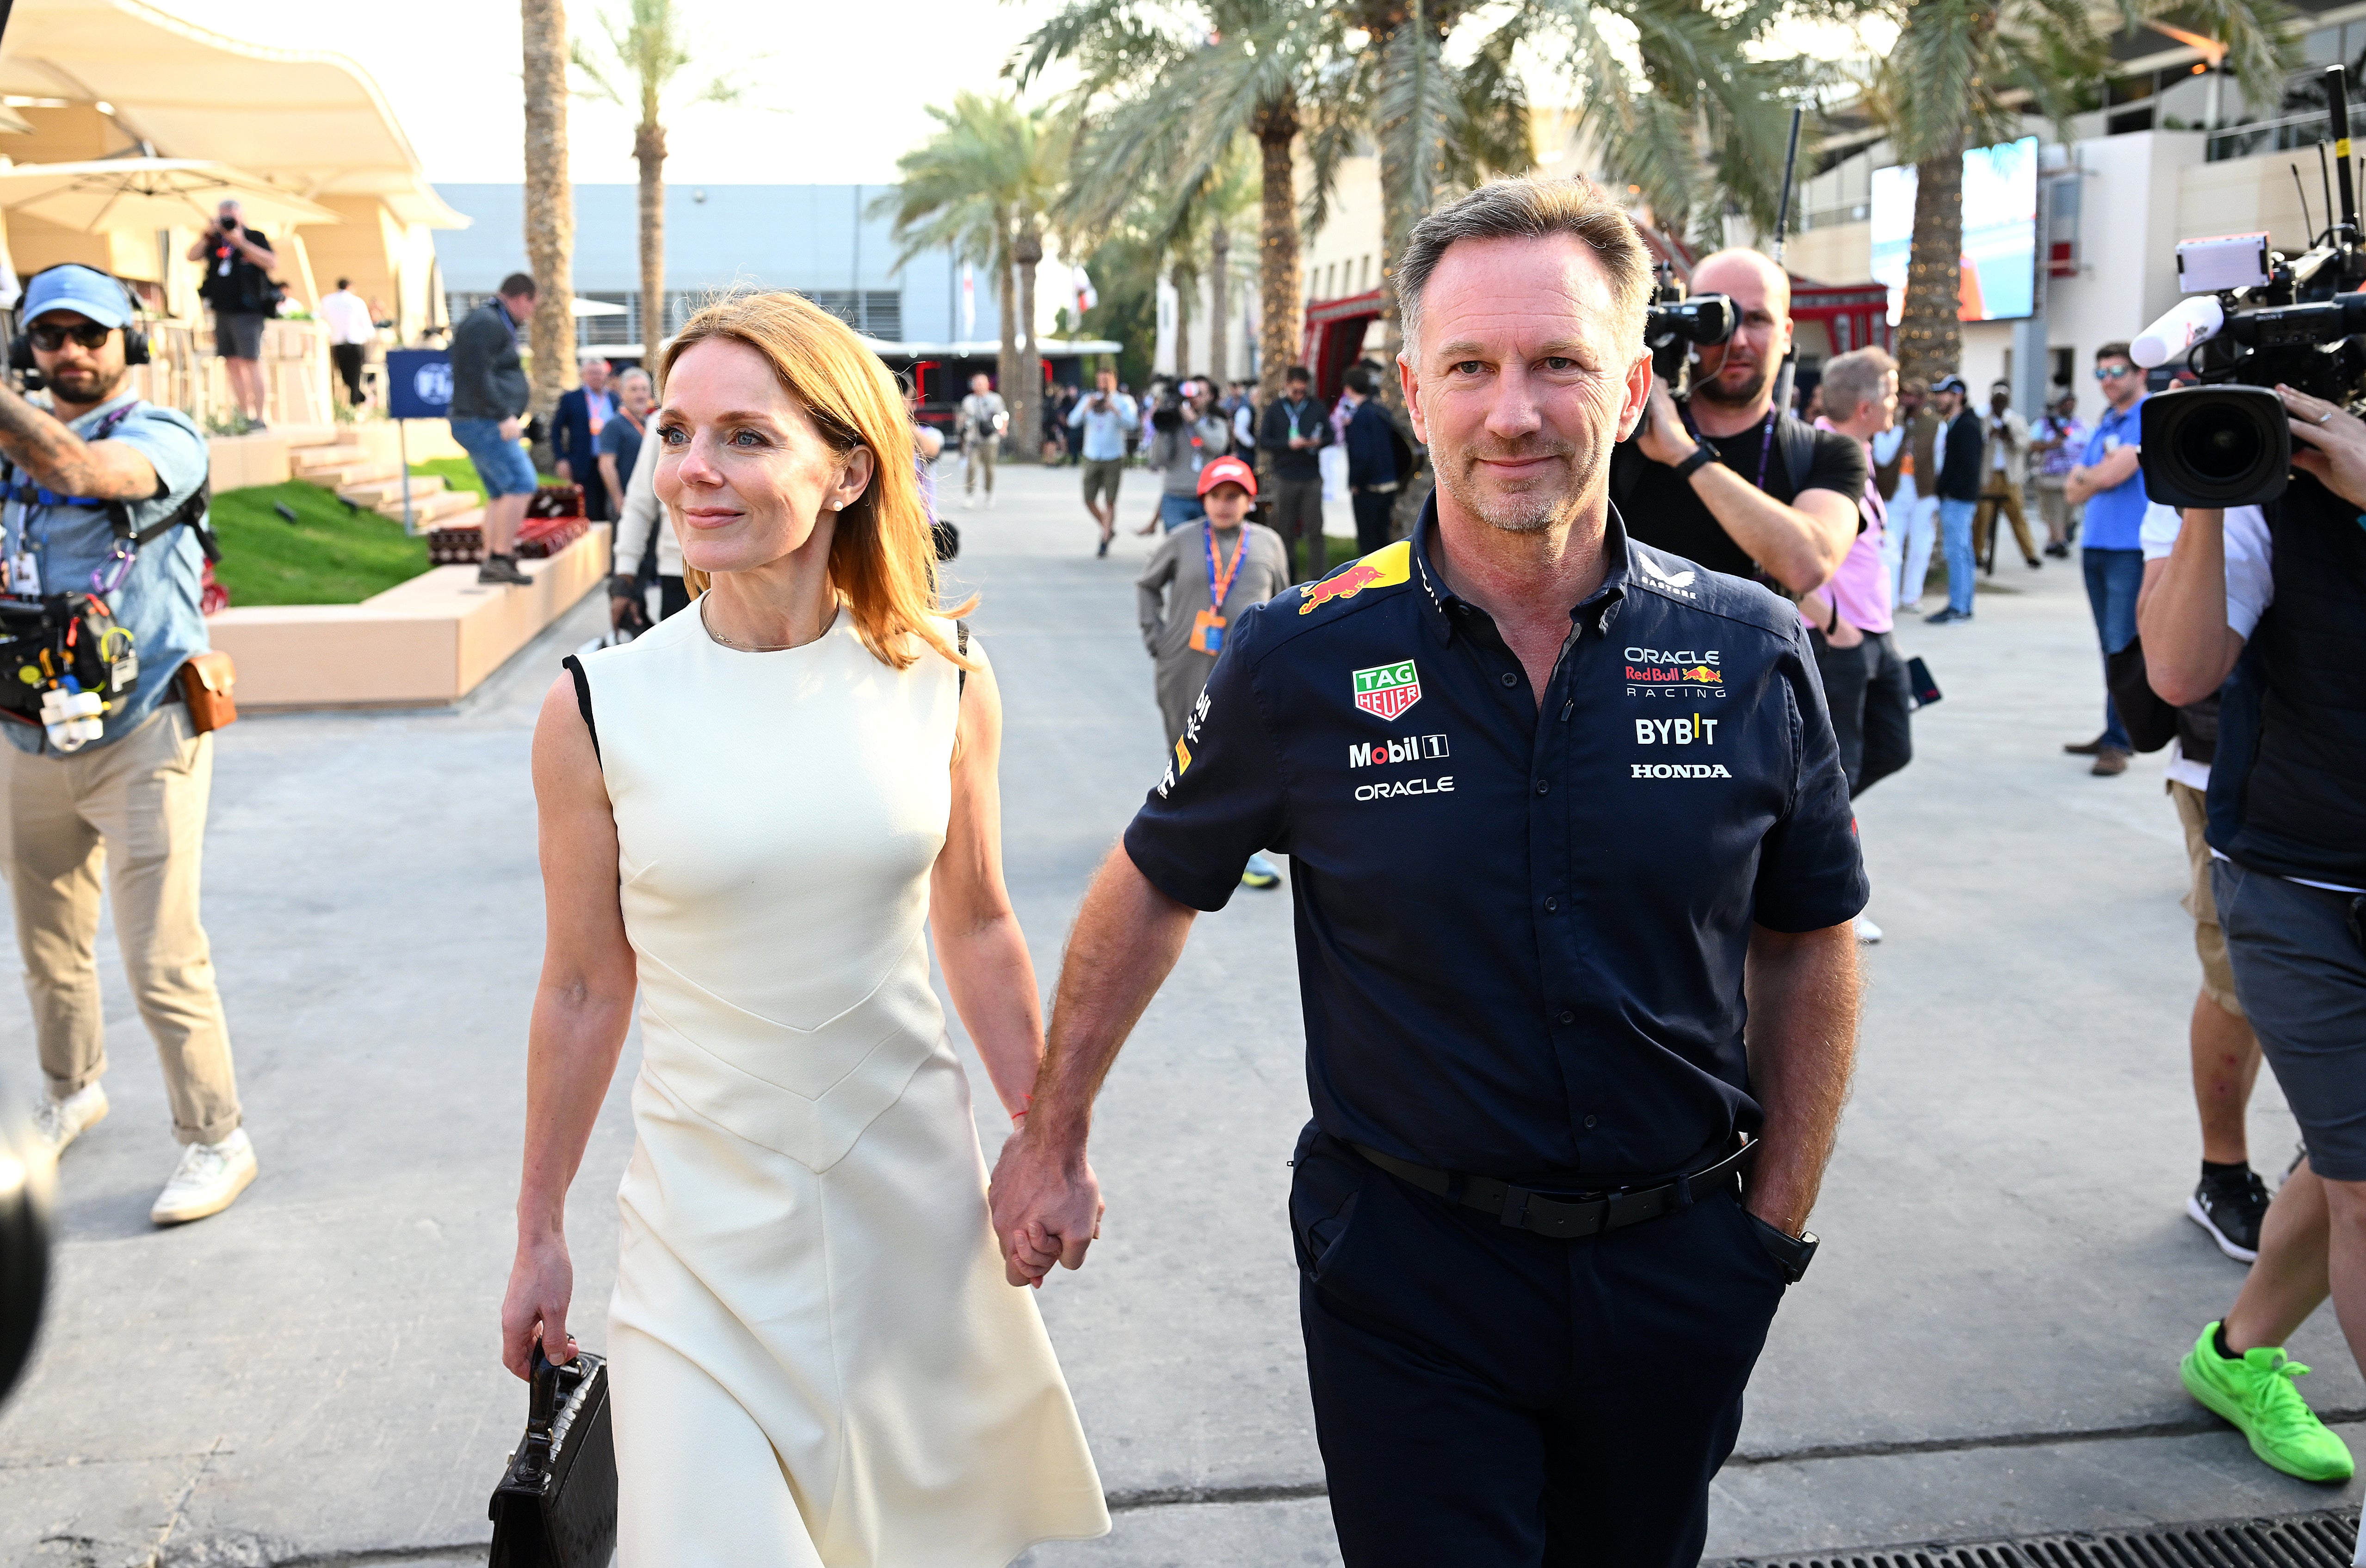 Horner has been cleared of any wrongdoing